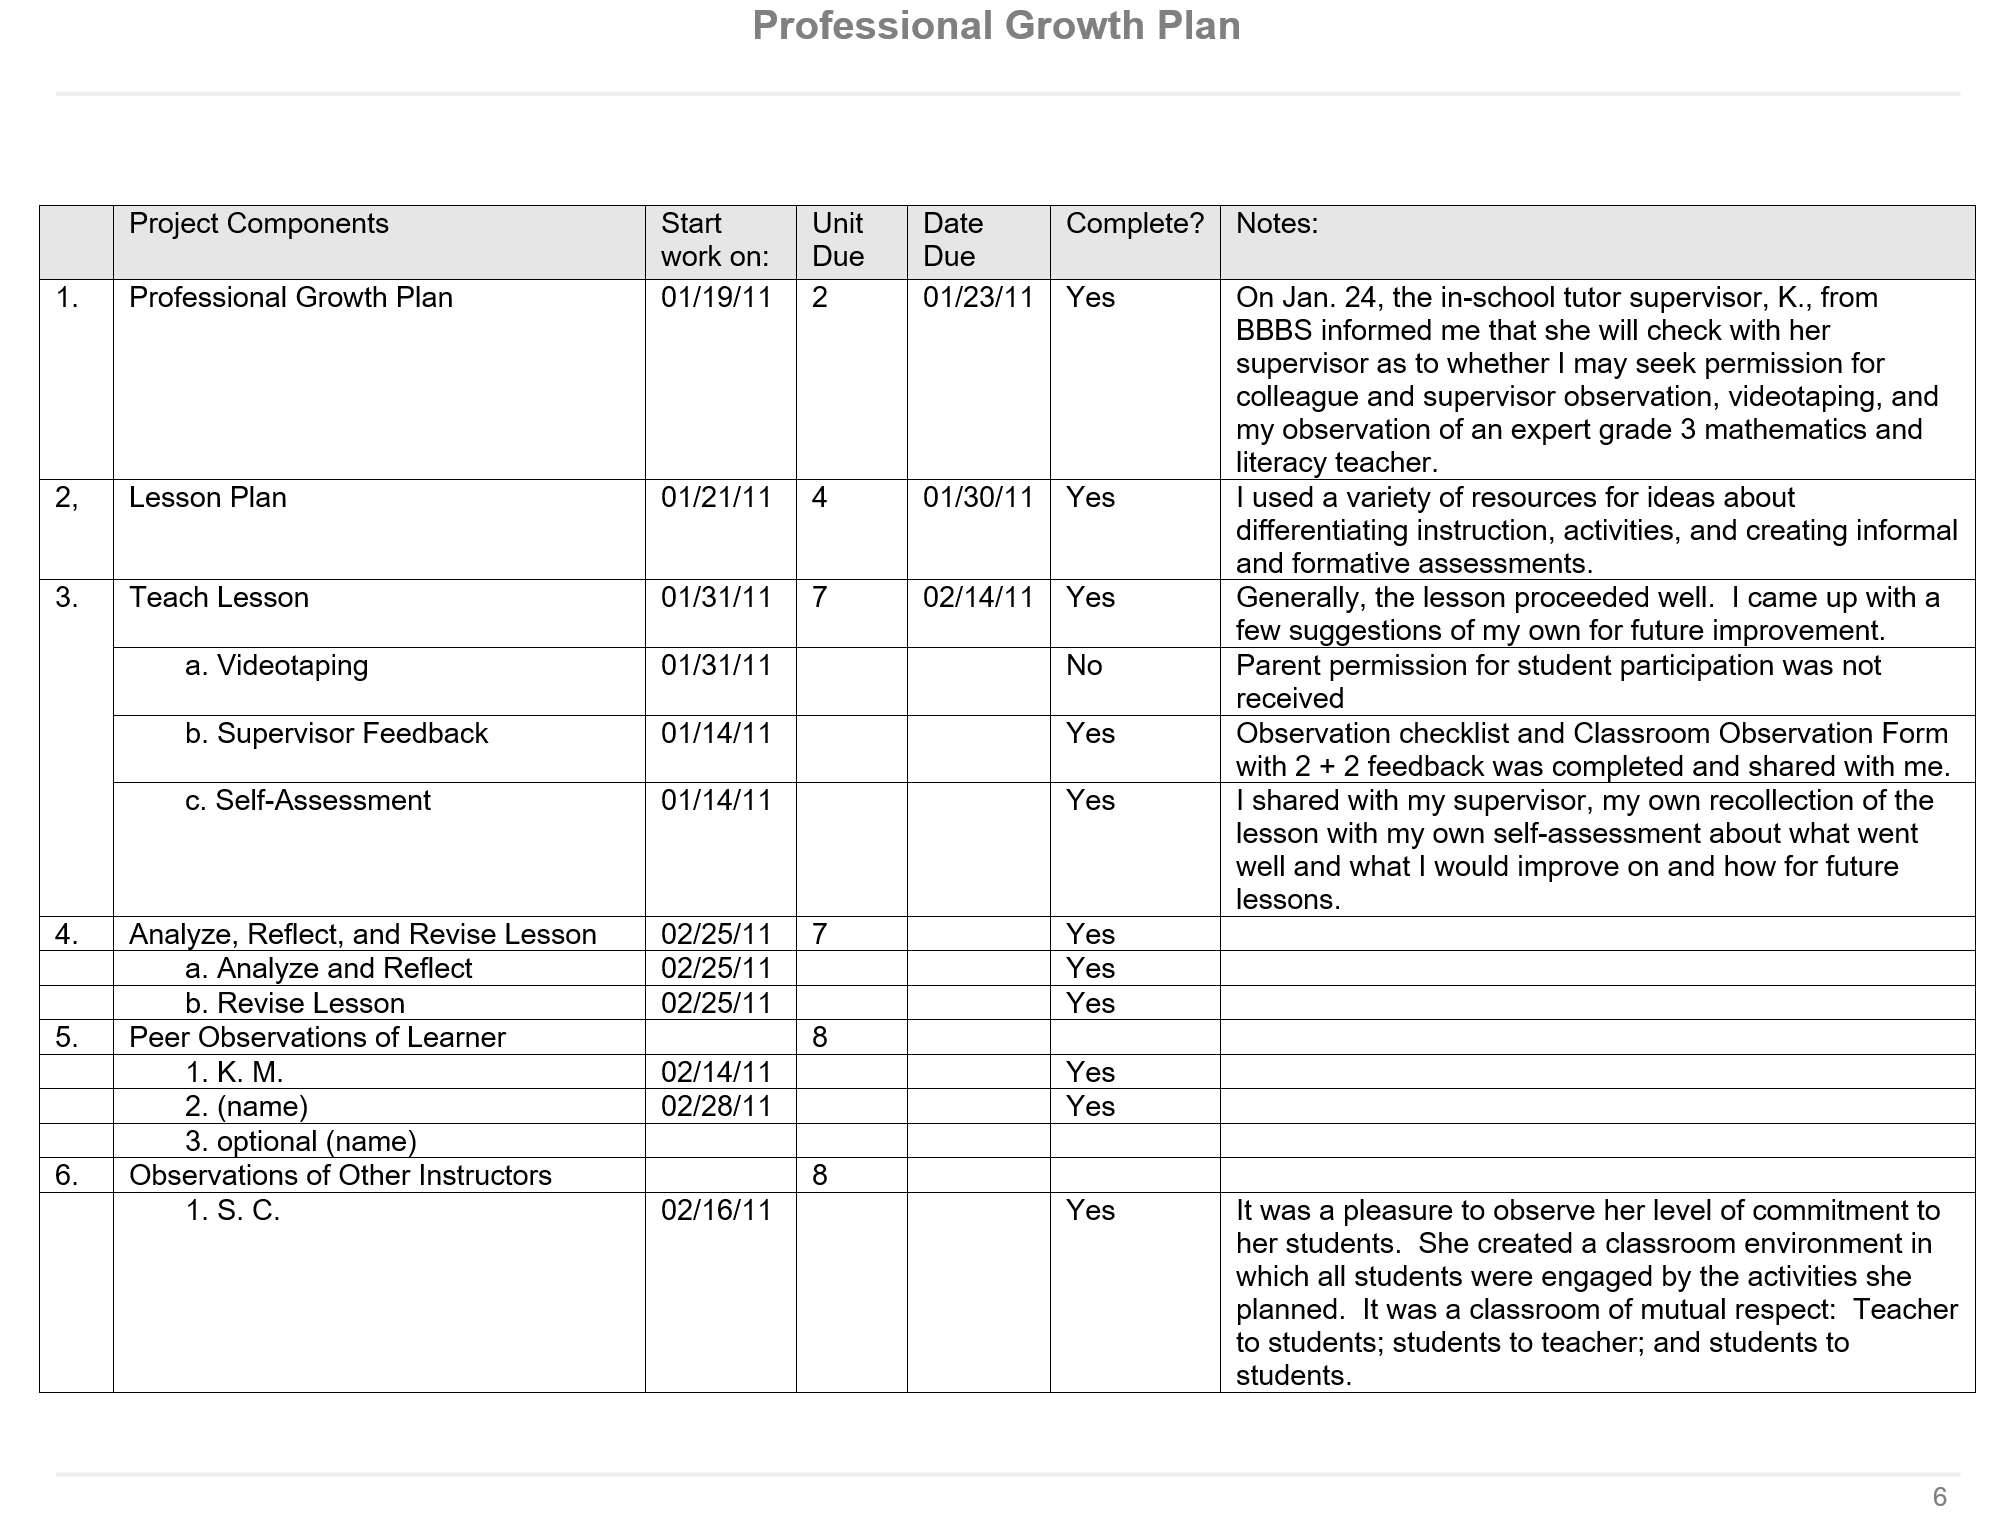 professional growth plan p 6 of 7